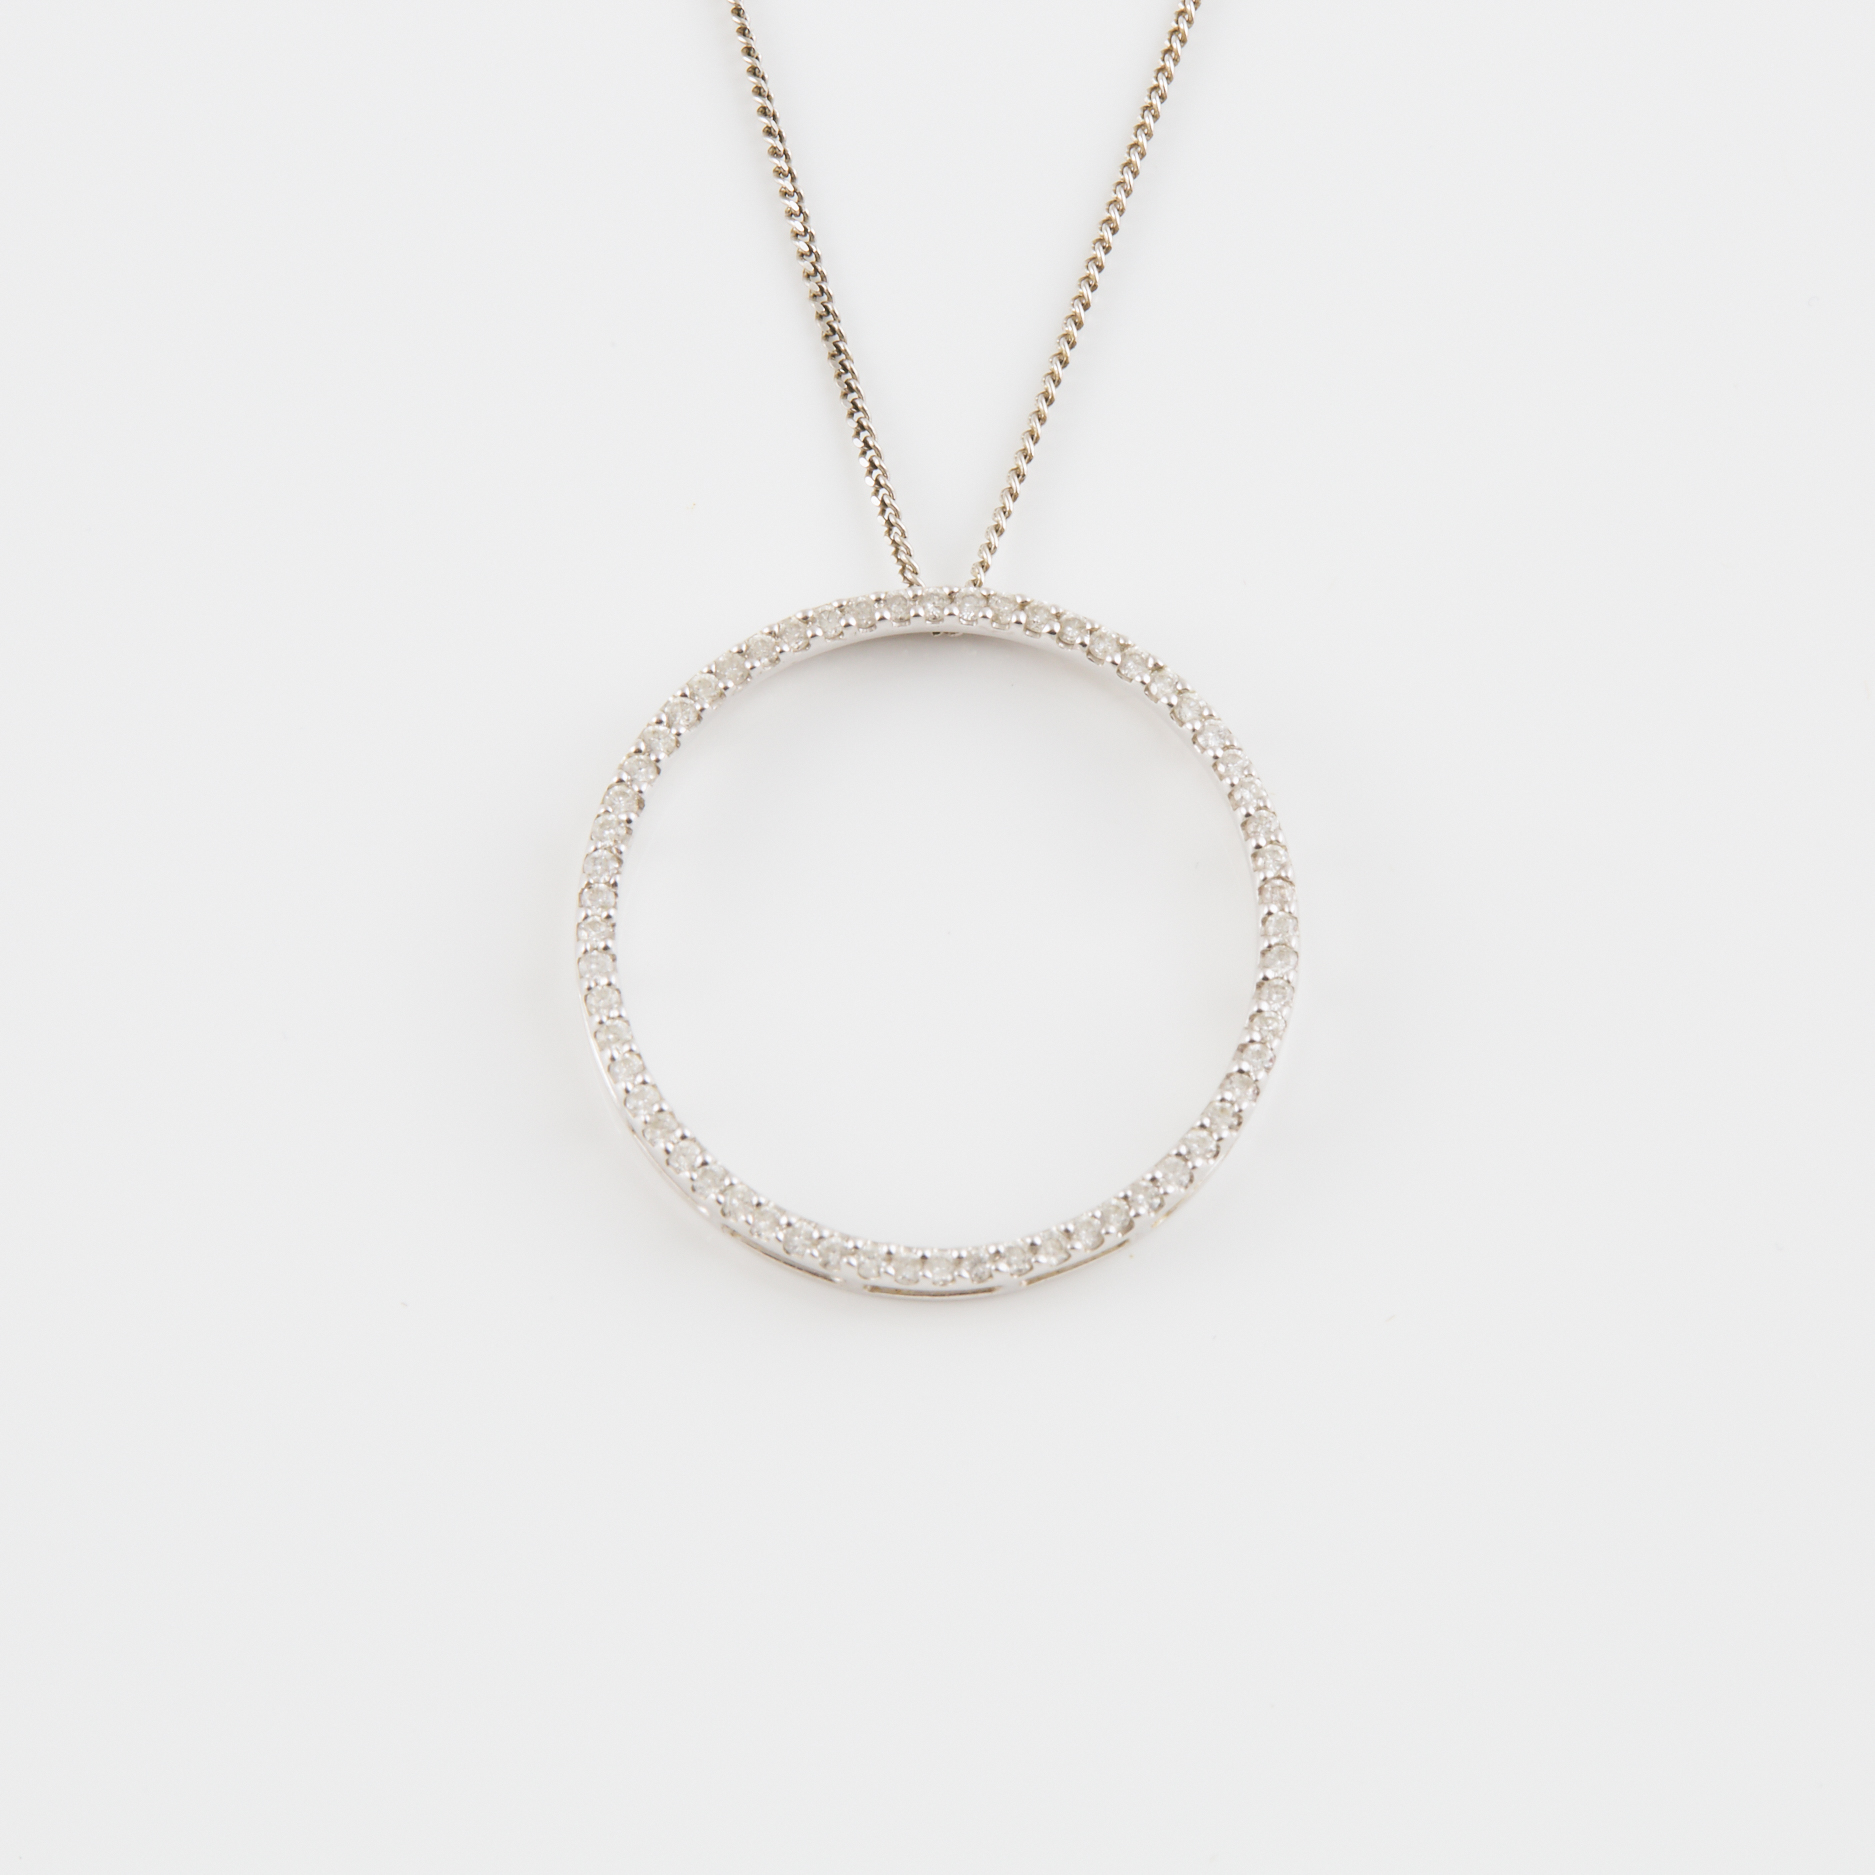 10k White Gold Circular Pendant And Chain